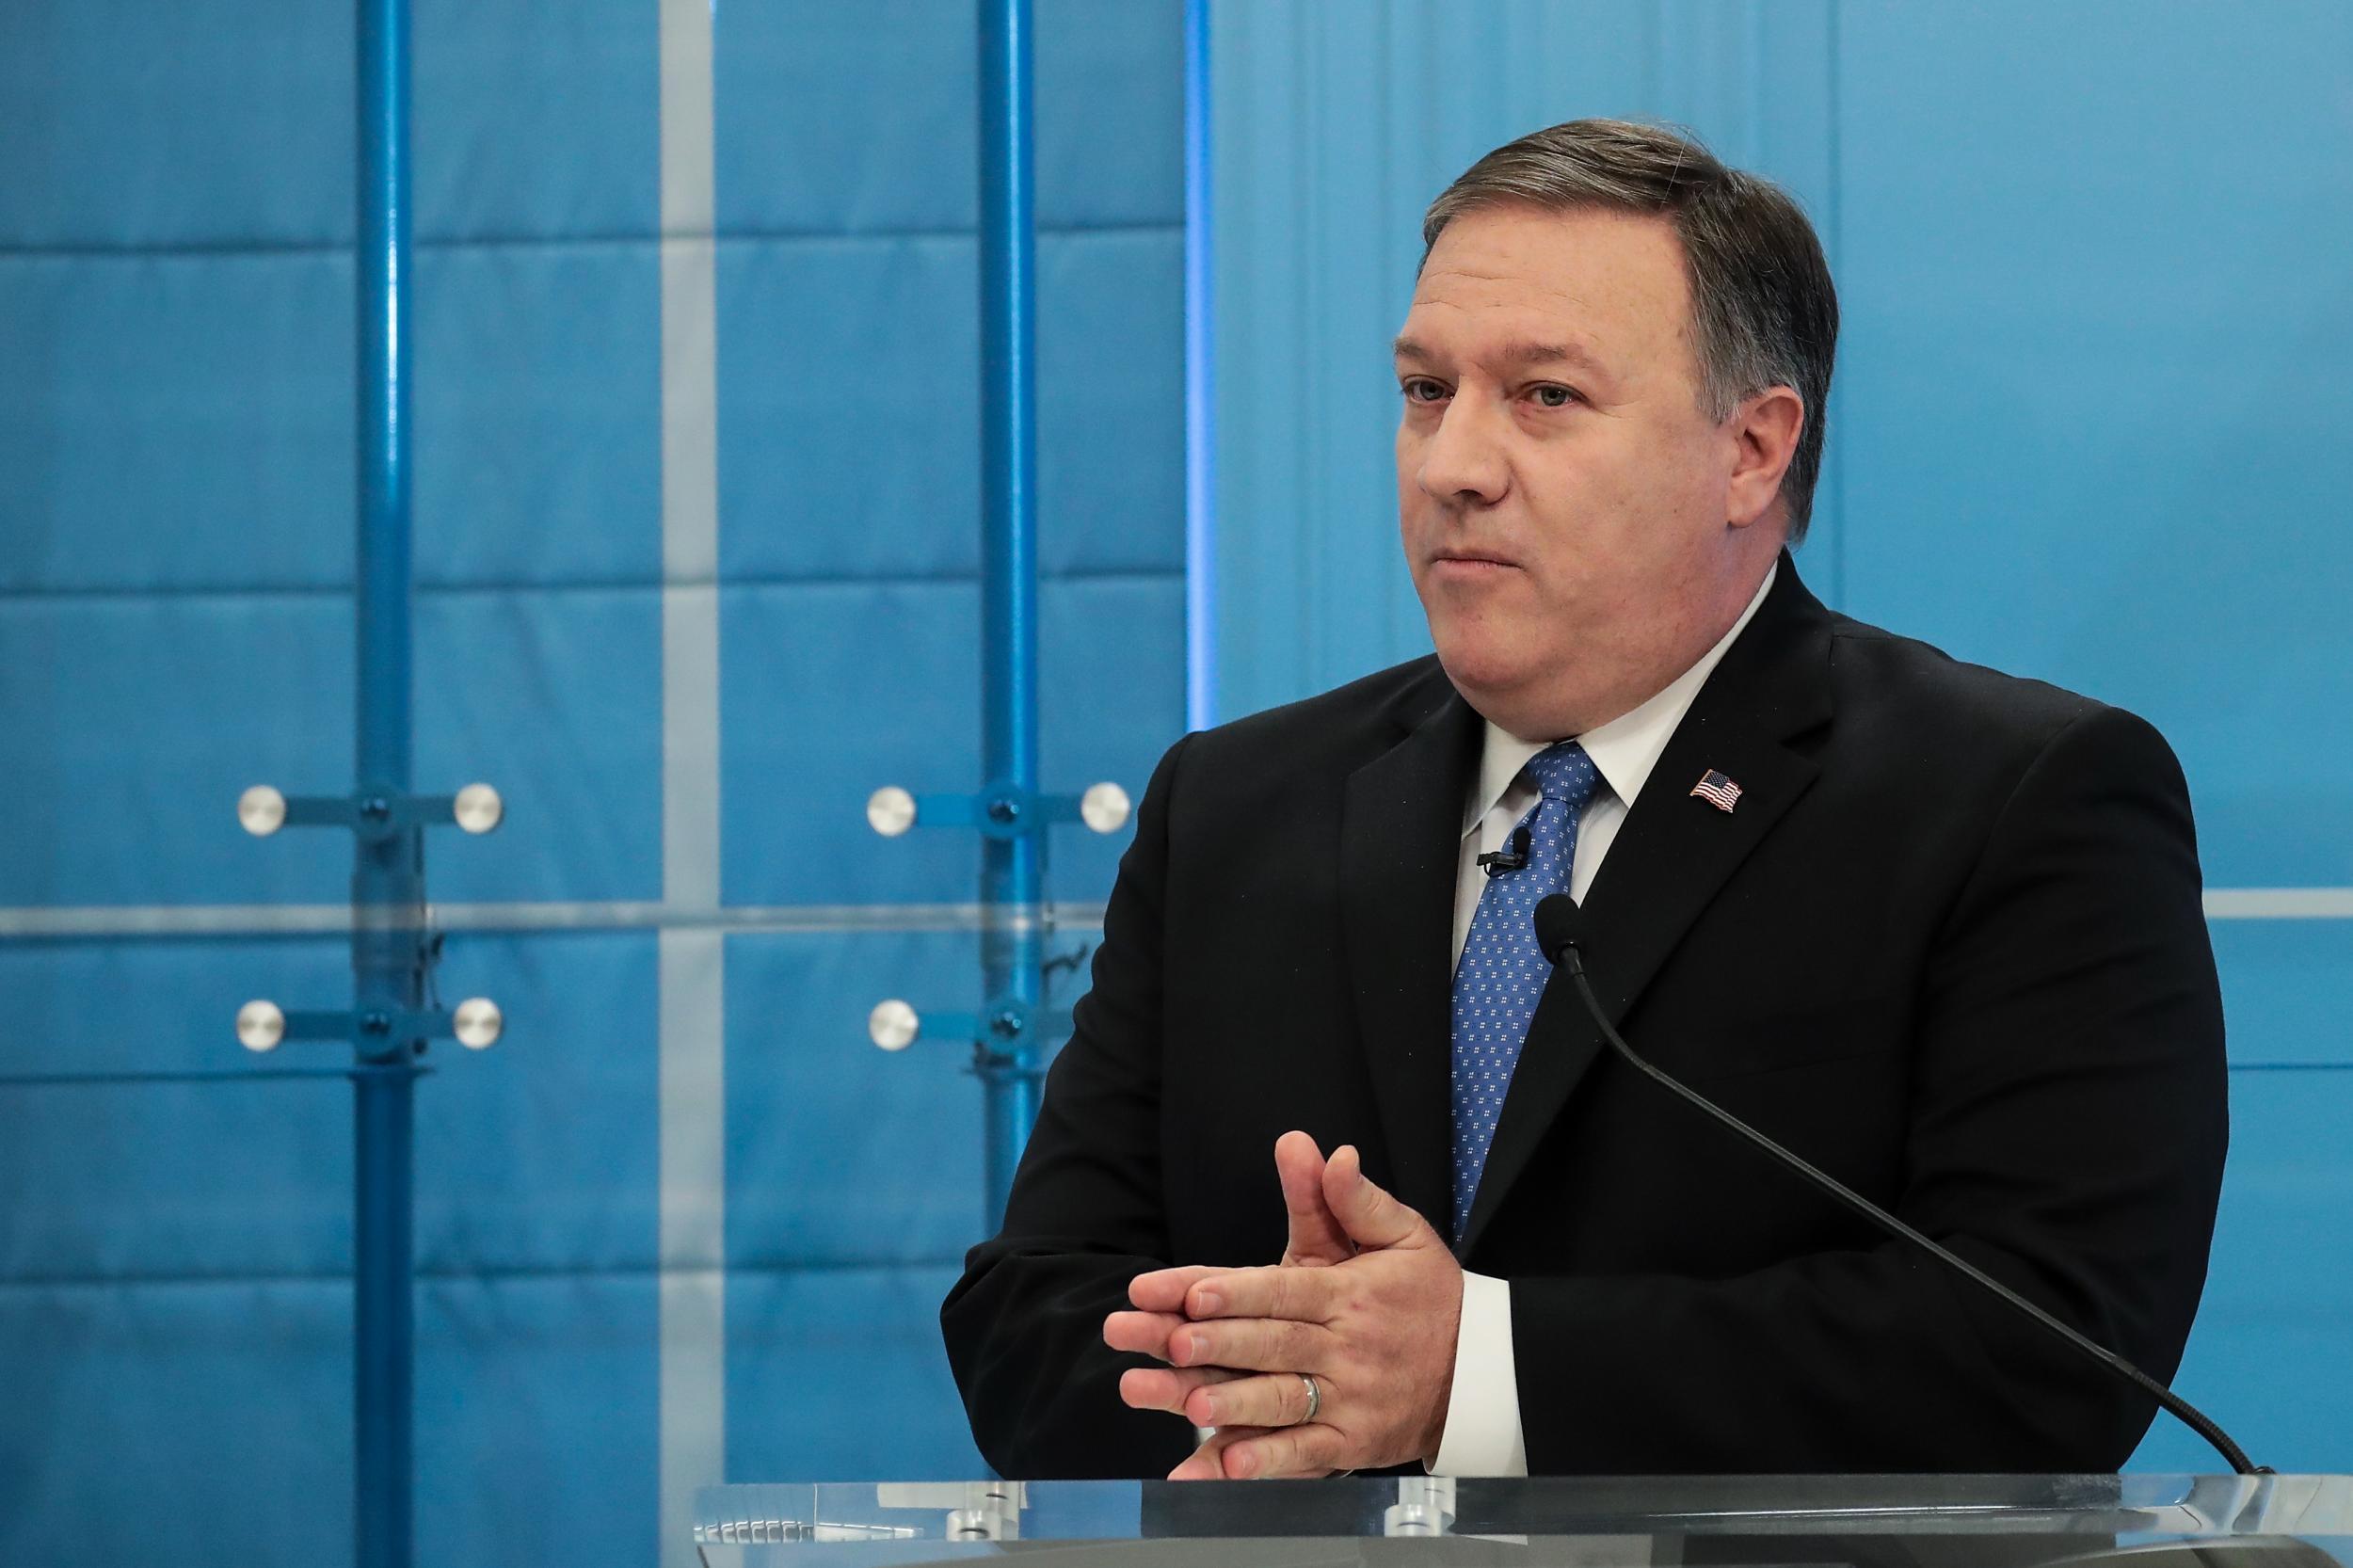 Director of the Central Intelligence Agency (CIA) Mike Pompeo speaks at the American Enterprise Institute